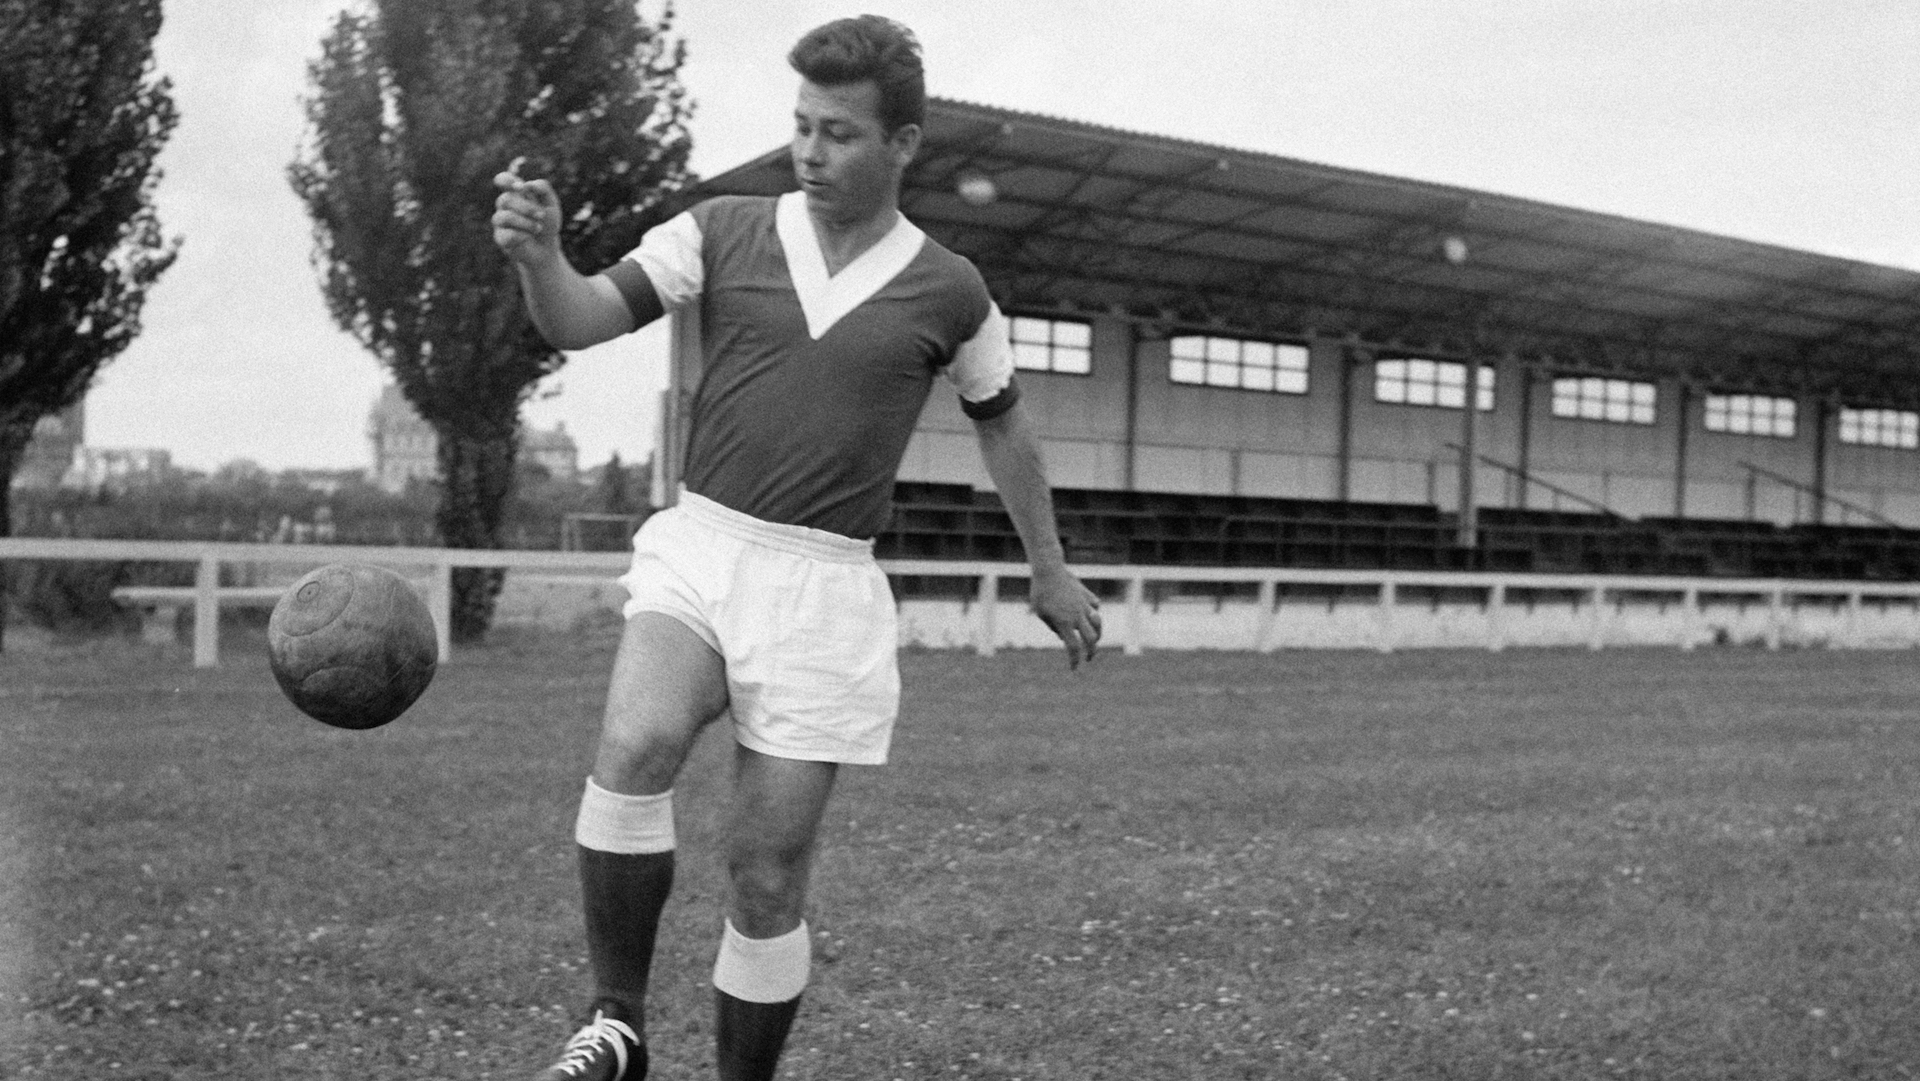 Just Fontaine